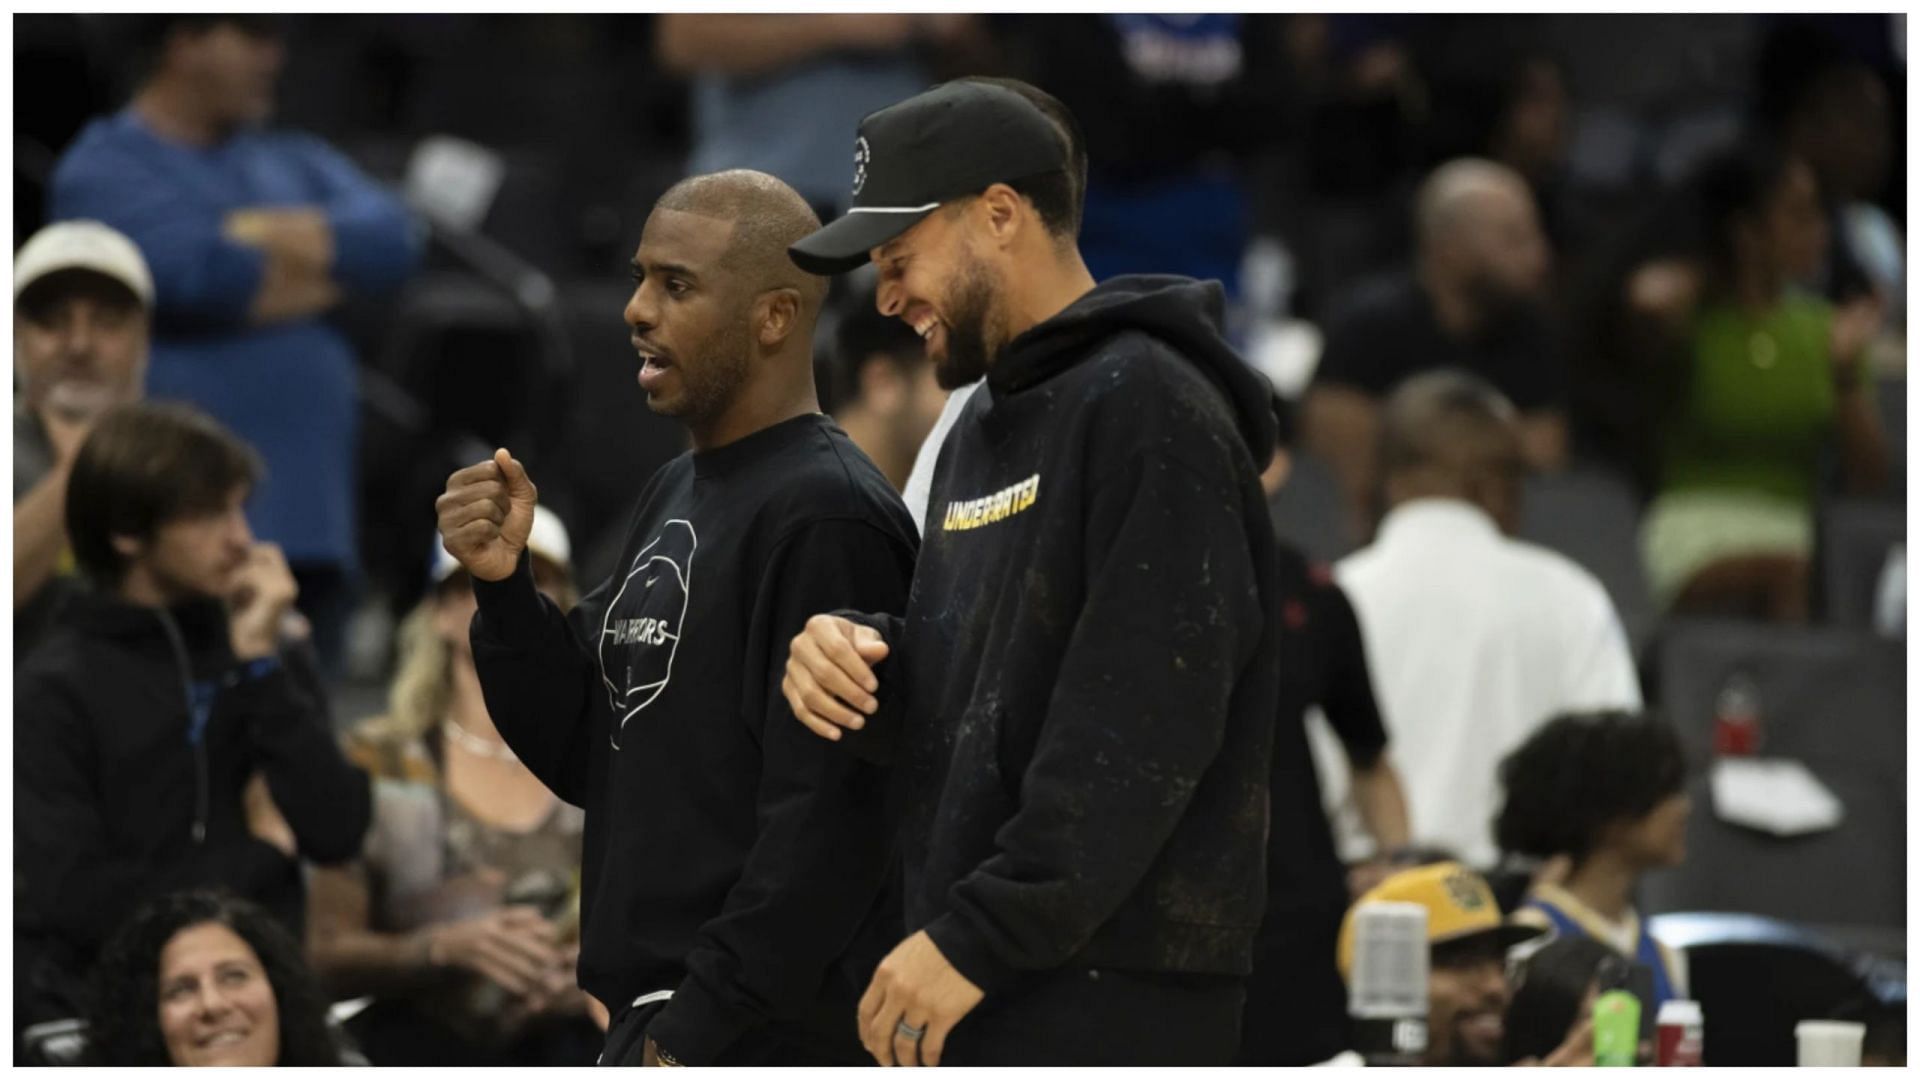 Steph Curry &amp; Chris Paul get into holiday spirit, belting Chris Brown&rsquo;s &lsquo;This Christmas&rsquo; (AP Photo/Jose Luis Villegas)